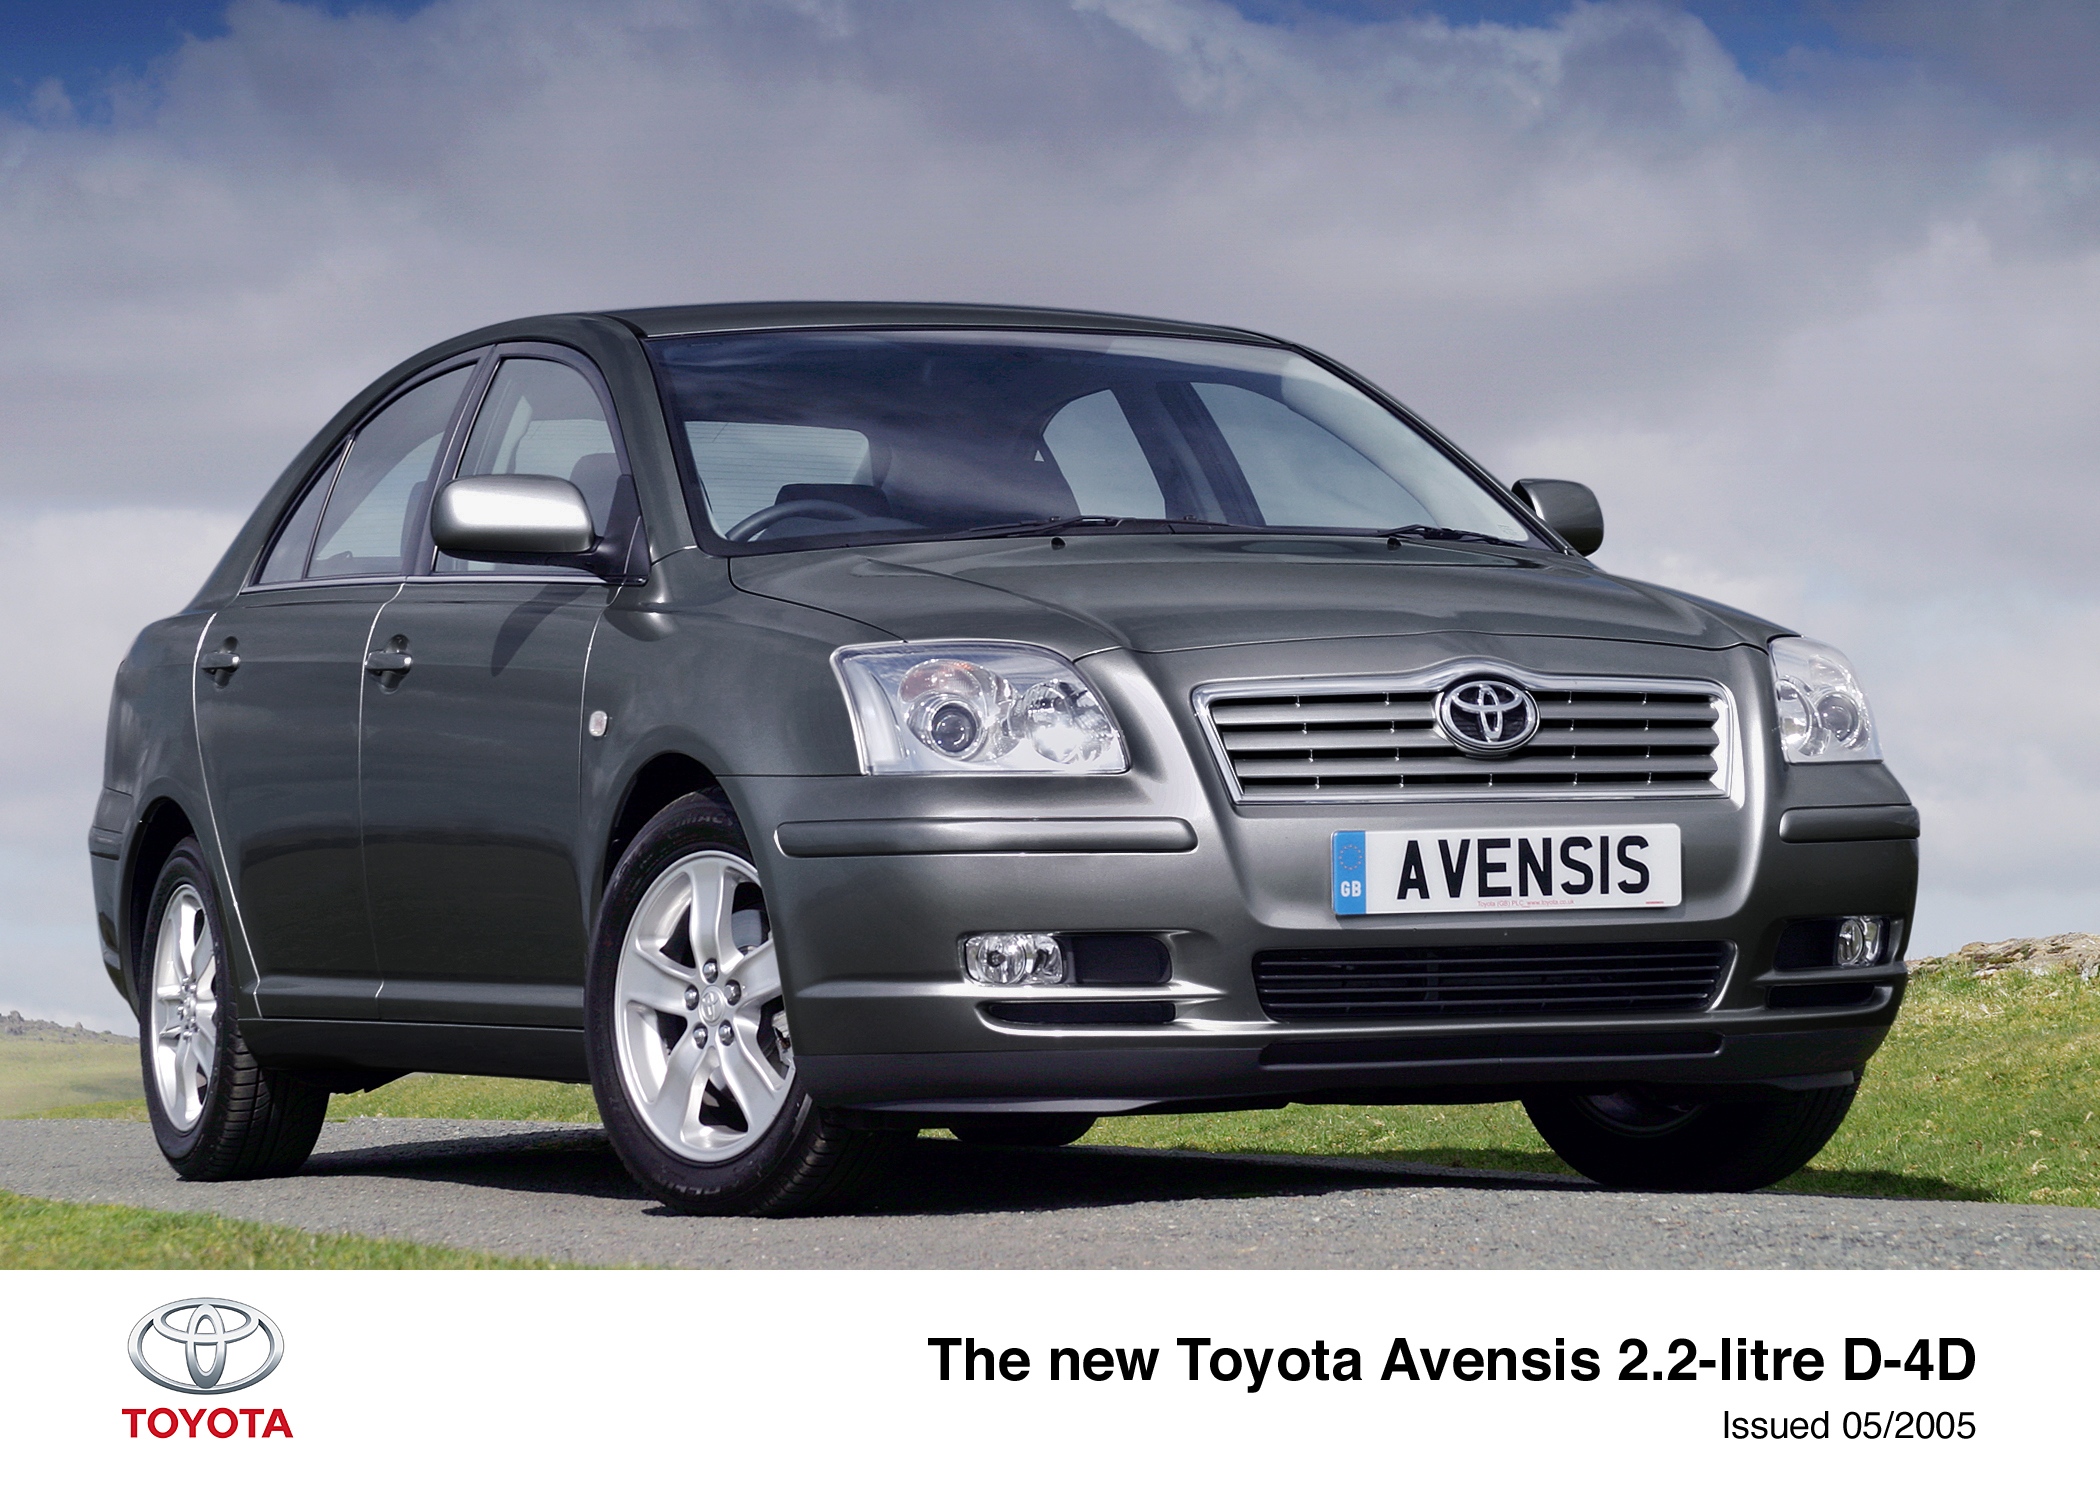 Toyota Avensis 2.2 D-4D generation T27, Automatic, 6-speed